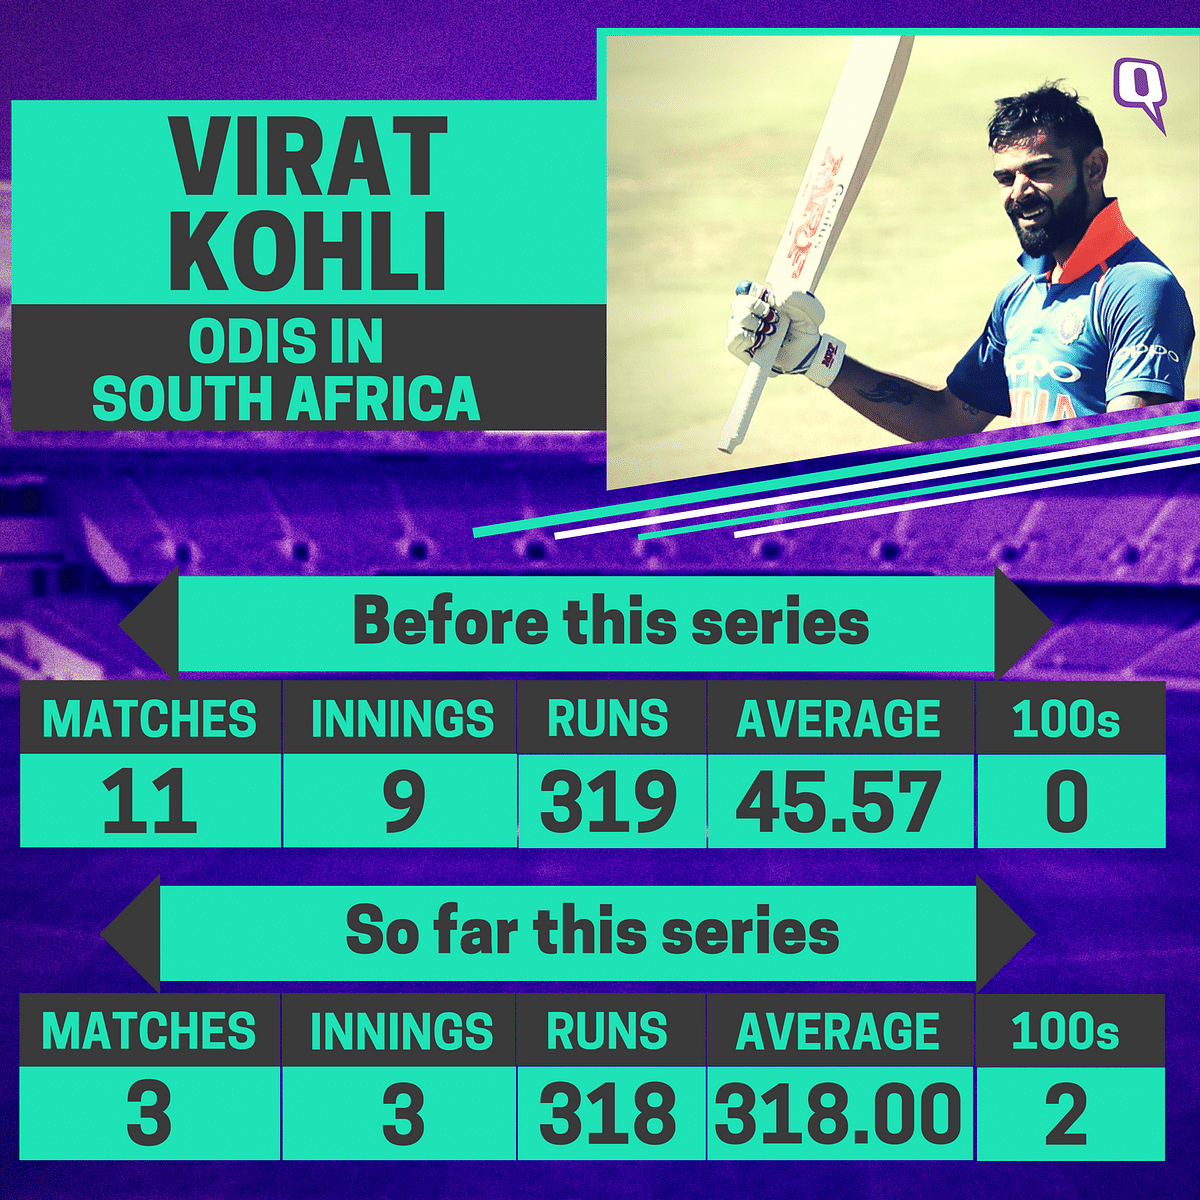 Virat Kohli set the record for the most ODI centuries by an Indian captain.